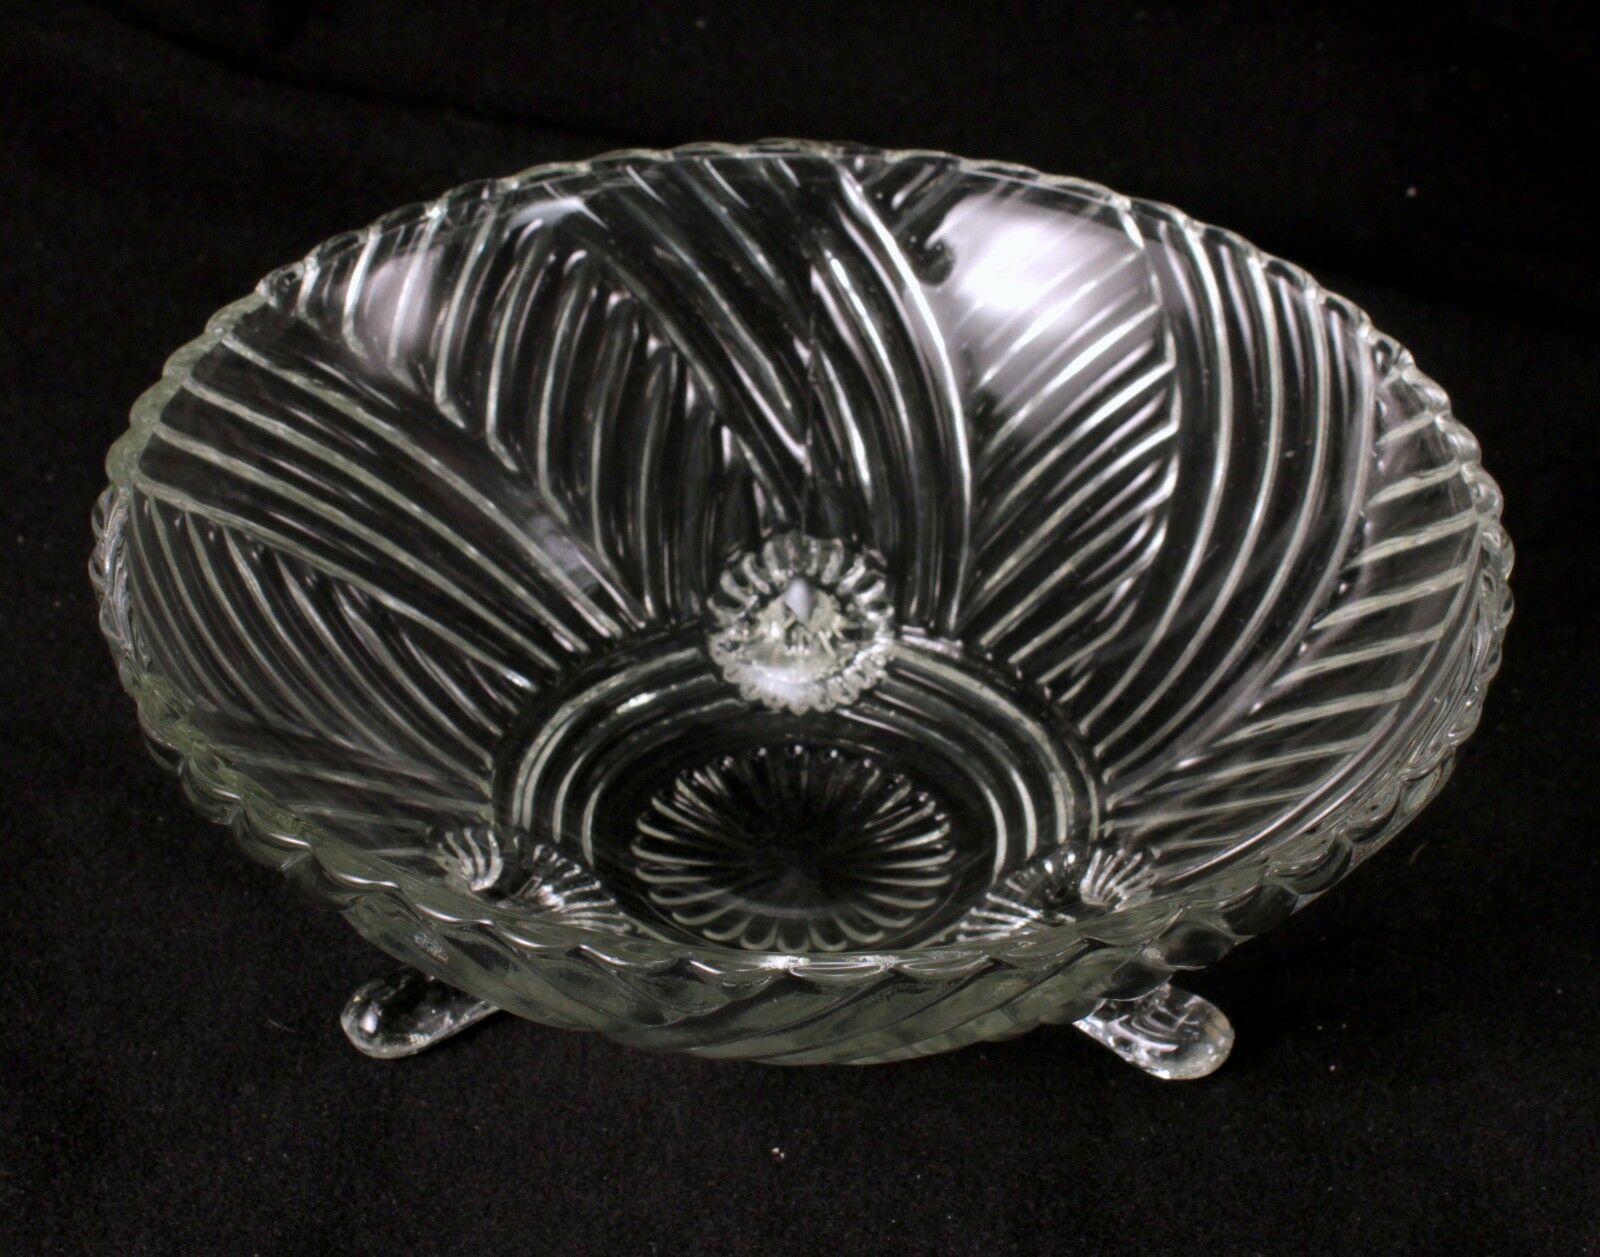 Anchor Hocking Ahc60 Clear Glass Serving Bowl 8.5 Inches Diameter 3 Footed